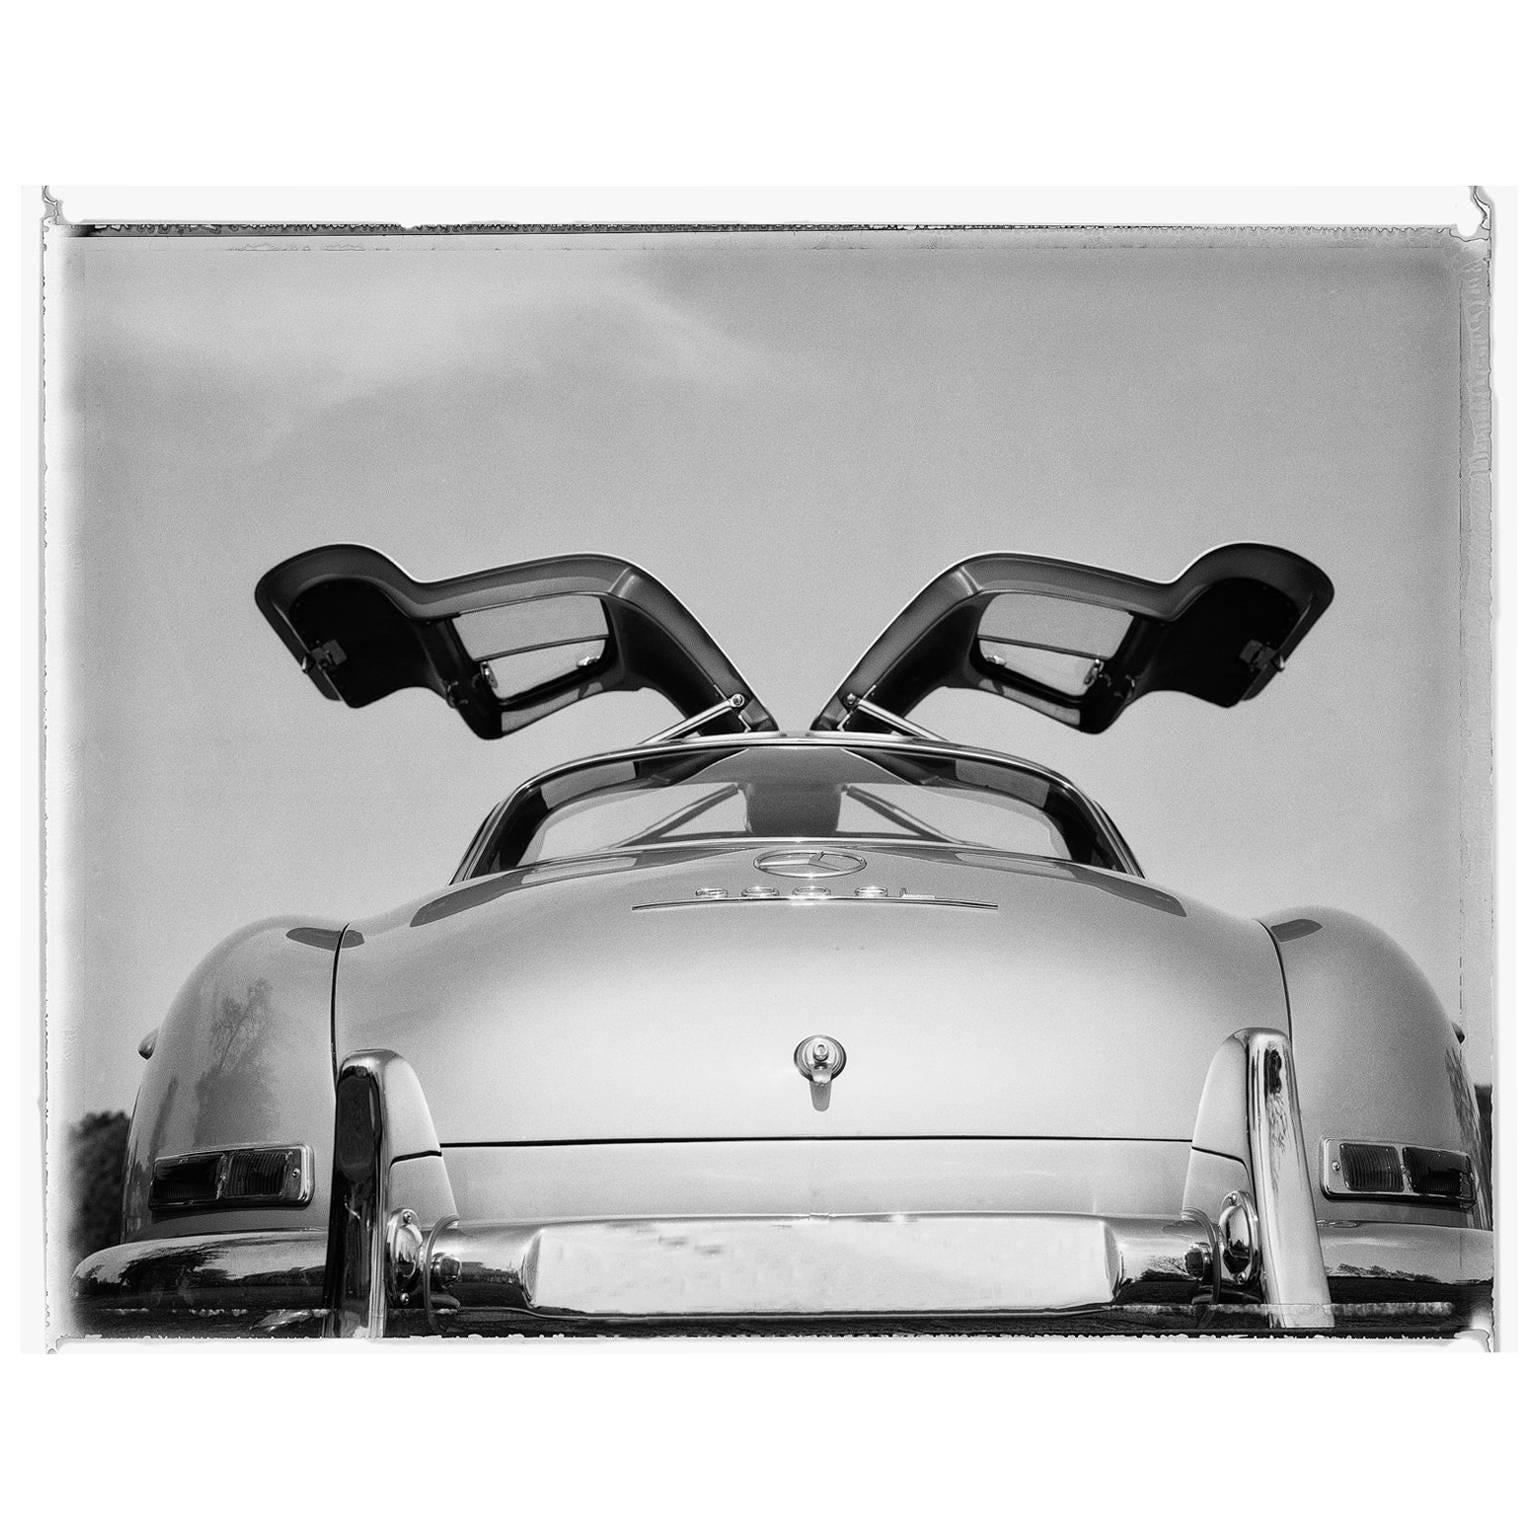 1955 Gullwing Mercedes Benz Photograph by Charles Baker For Sale